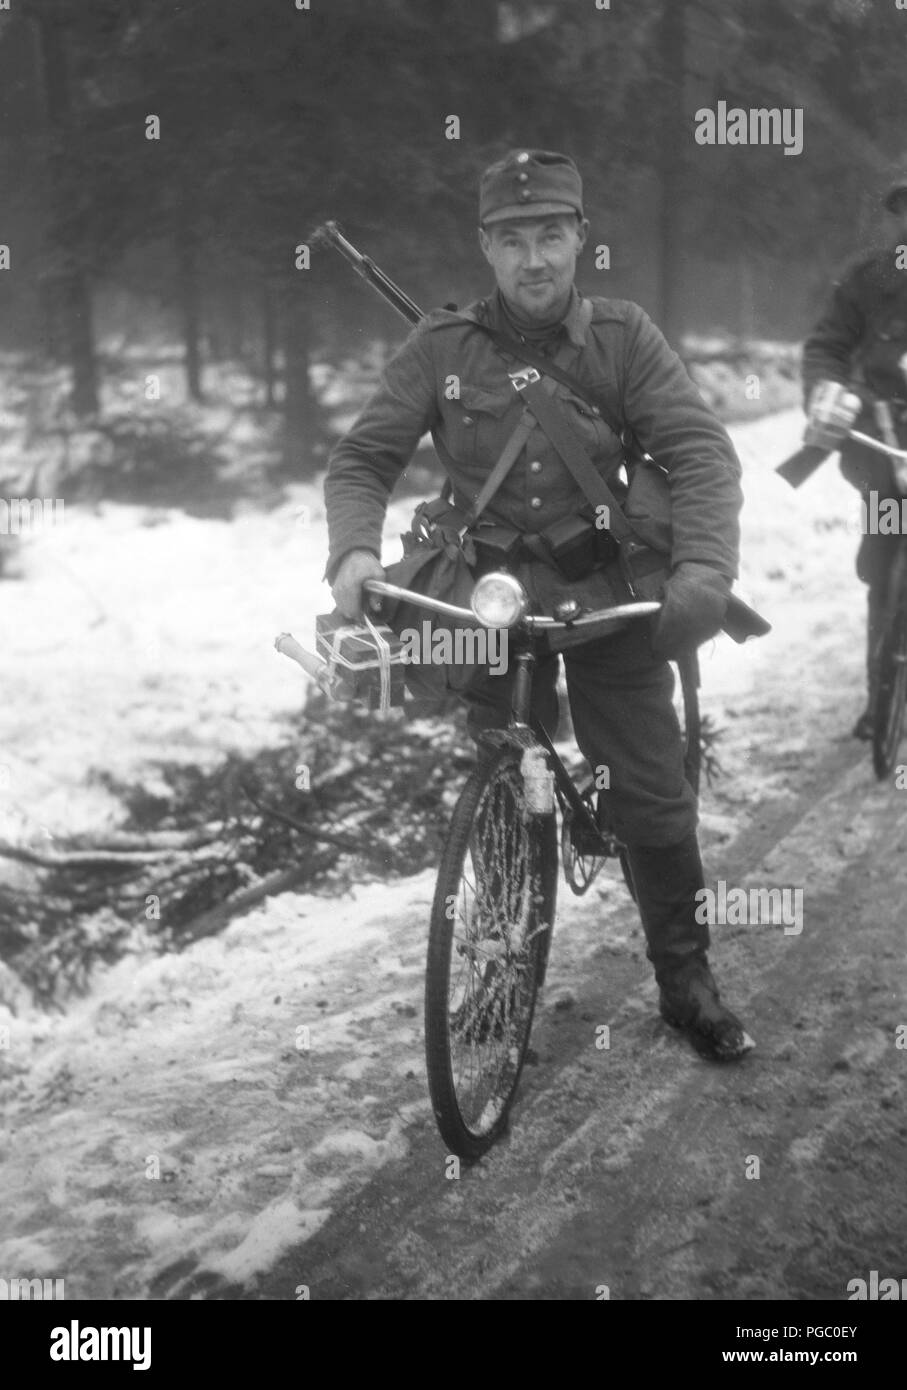 Winter war Finland 1939. A finnish soldier transporting messages on his bicycle close to the front at the Mannerheim line. Photographer Kristoffersson is a war photographer during the first months of the military conflict between the Soviet Union and Finland. Picture taken one month after the outbreak. December 1939 Finland. Photo Kristoffersson 94-4 Stock Photo